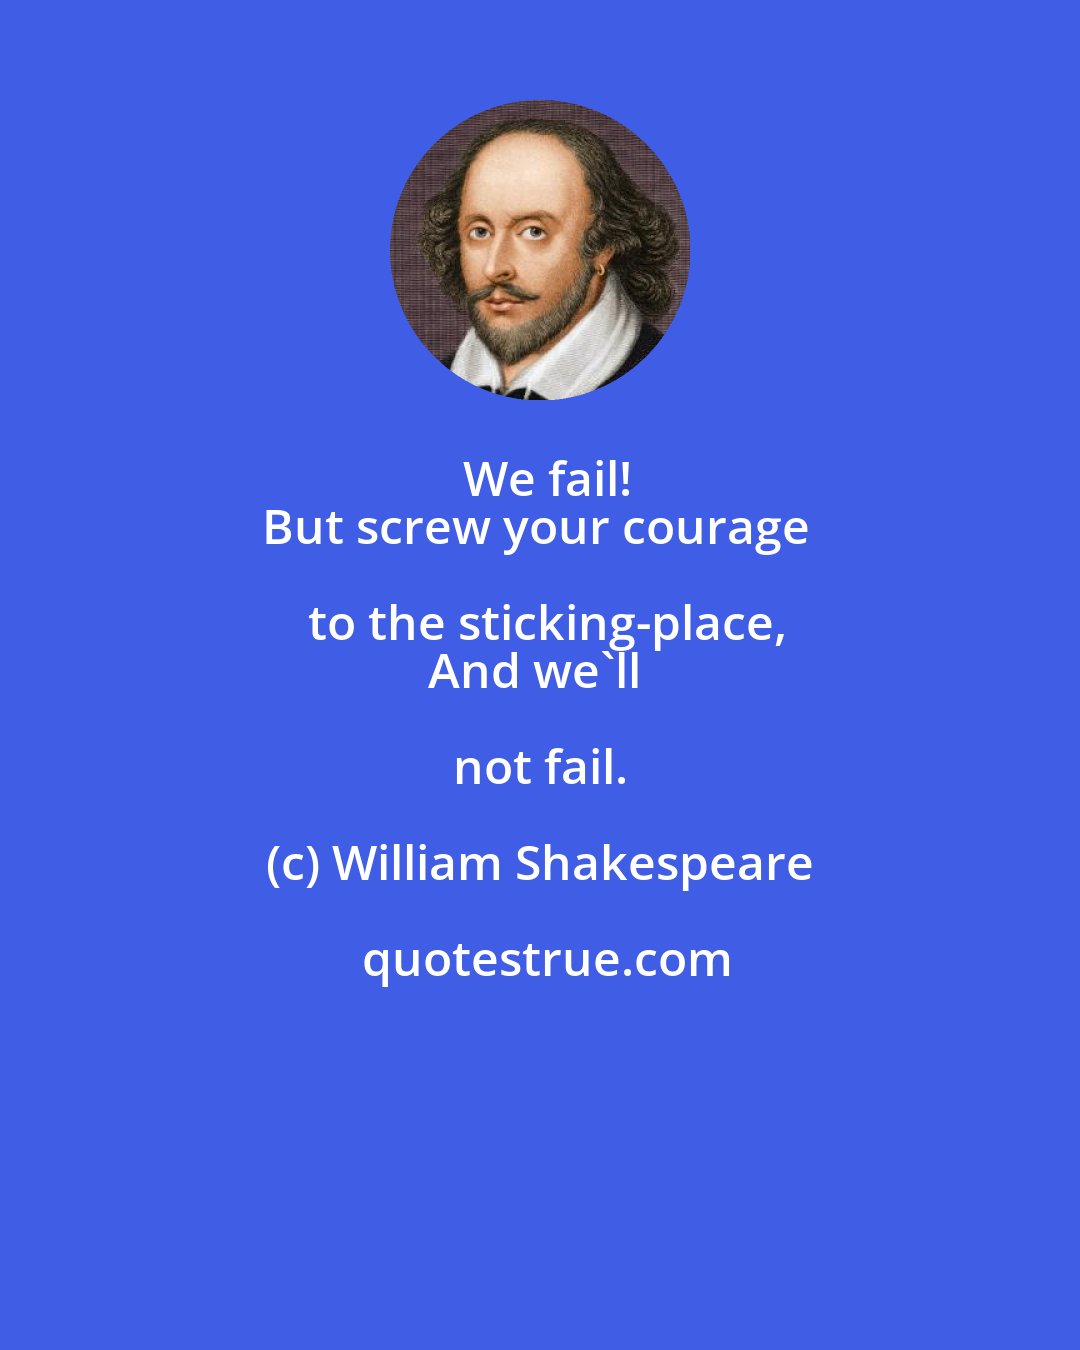 William Shakespeare: We fail!
But screw your courage to the sticking-place,
And we'll not fail.